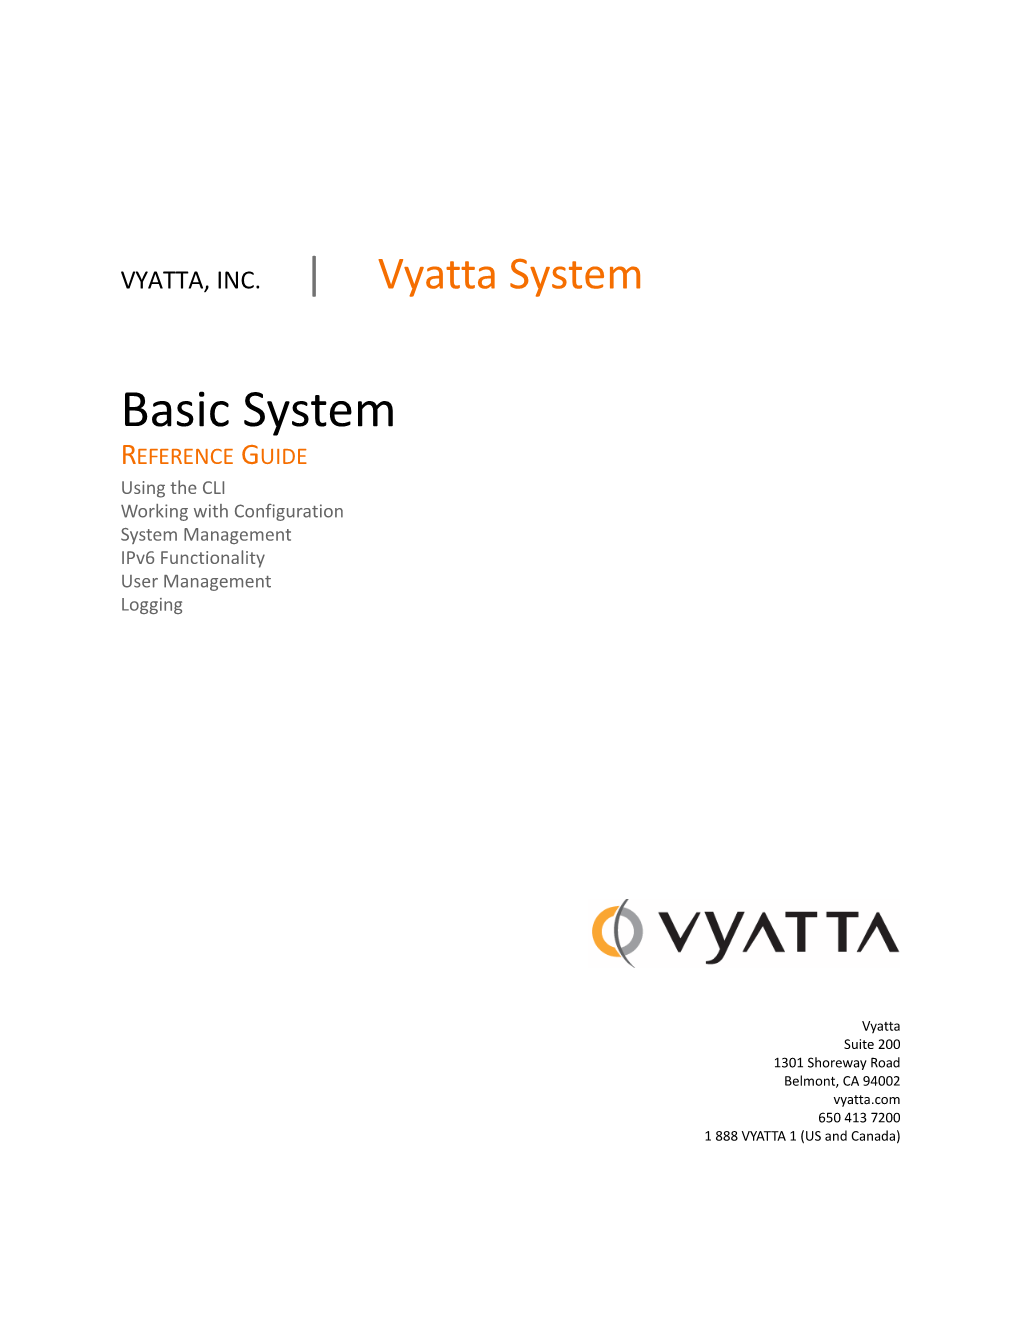 Basic System REFERENCE GUIDE Using the CLI Working with Configuration System Management Ipv6 Functionality User Management Logging